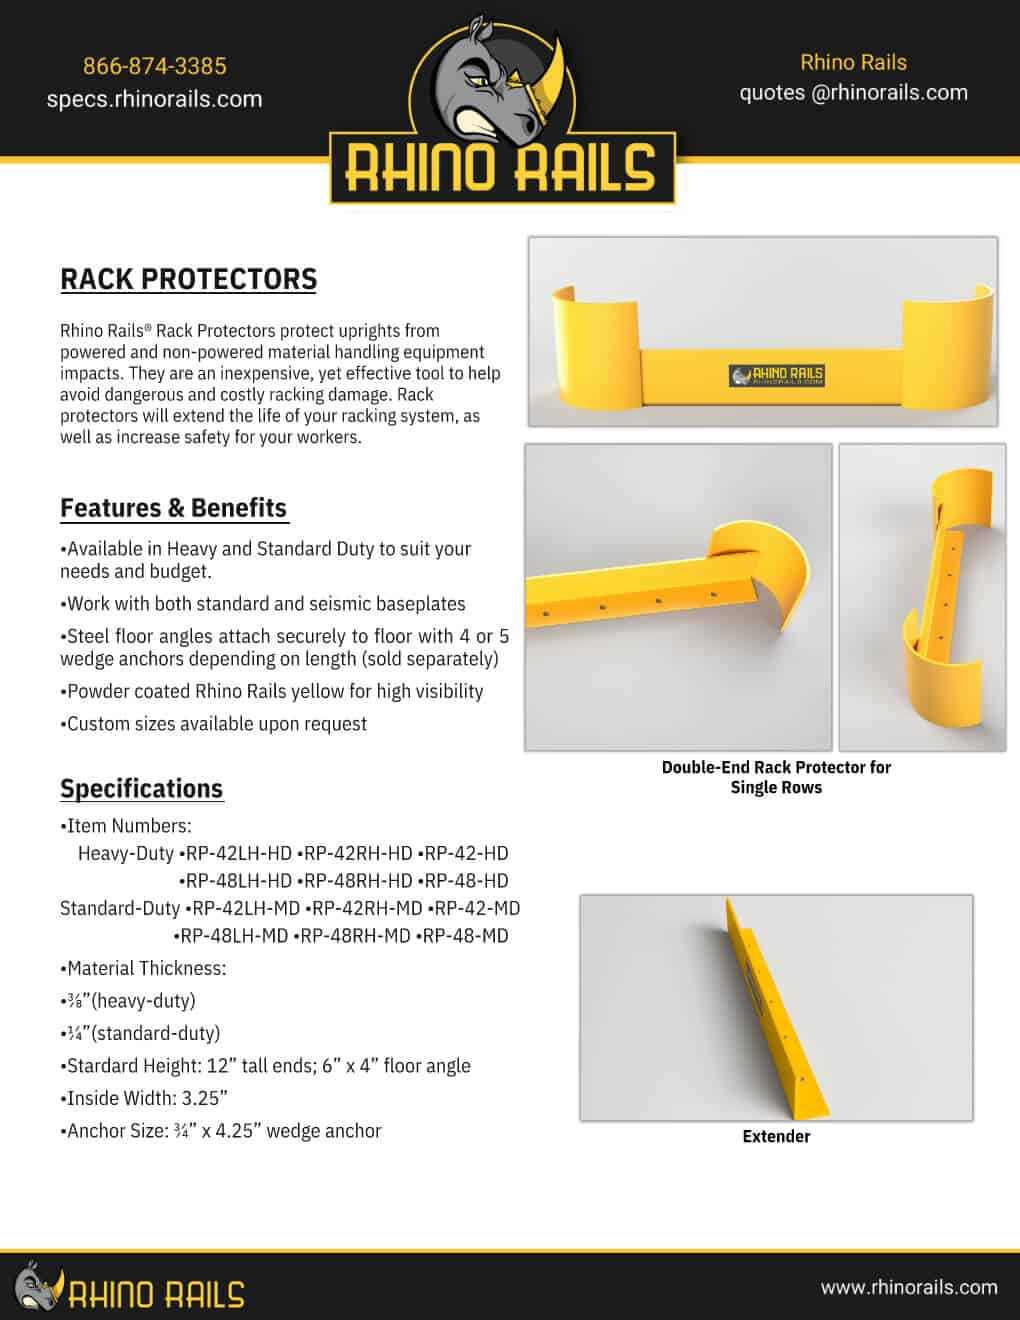 Universal Rack Protector - Product Information Sheet - Photo 1